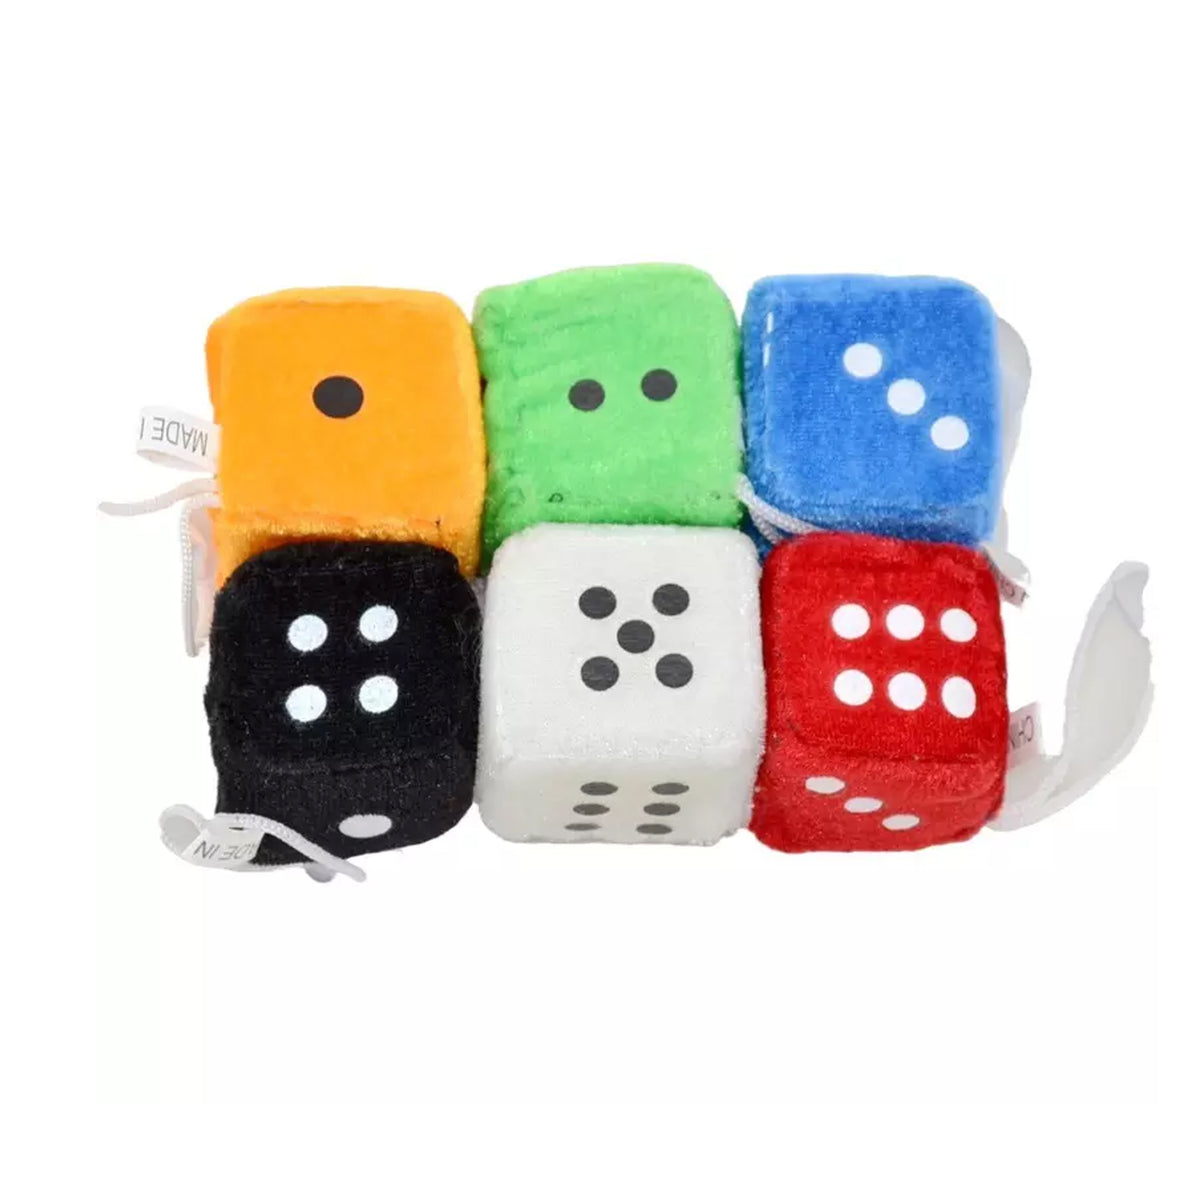 Add Some Fun and Flair with Assorted Window/Car Hanging Dice Plush Fuzzy Toy